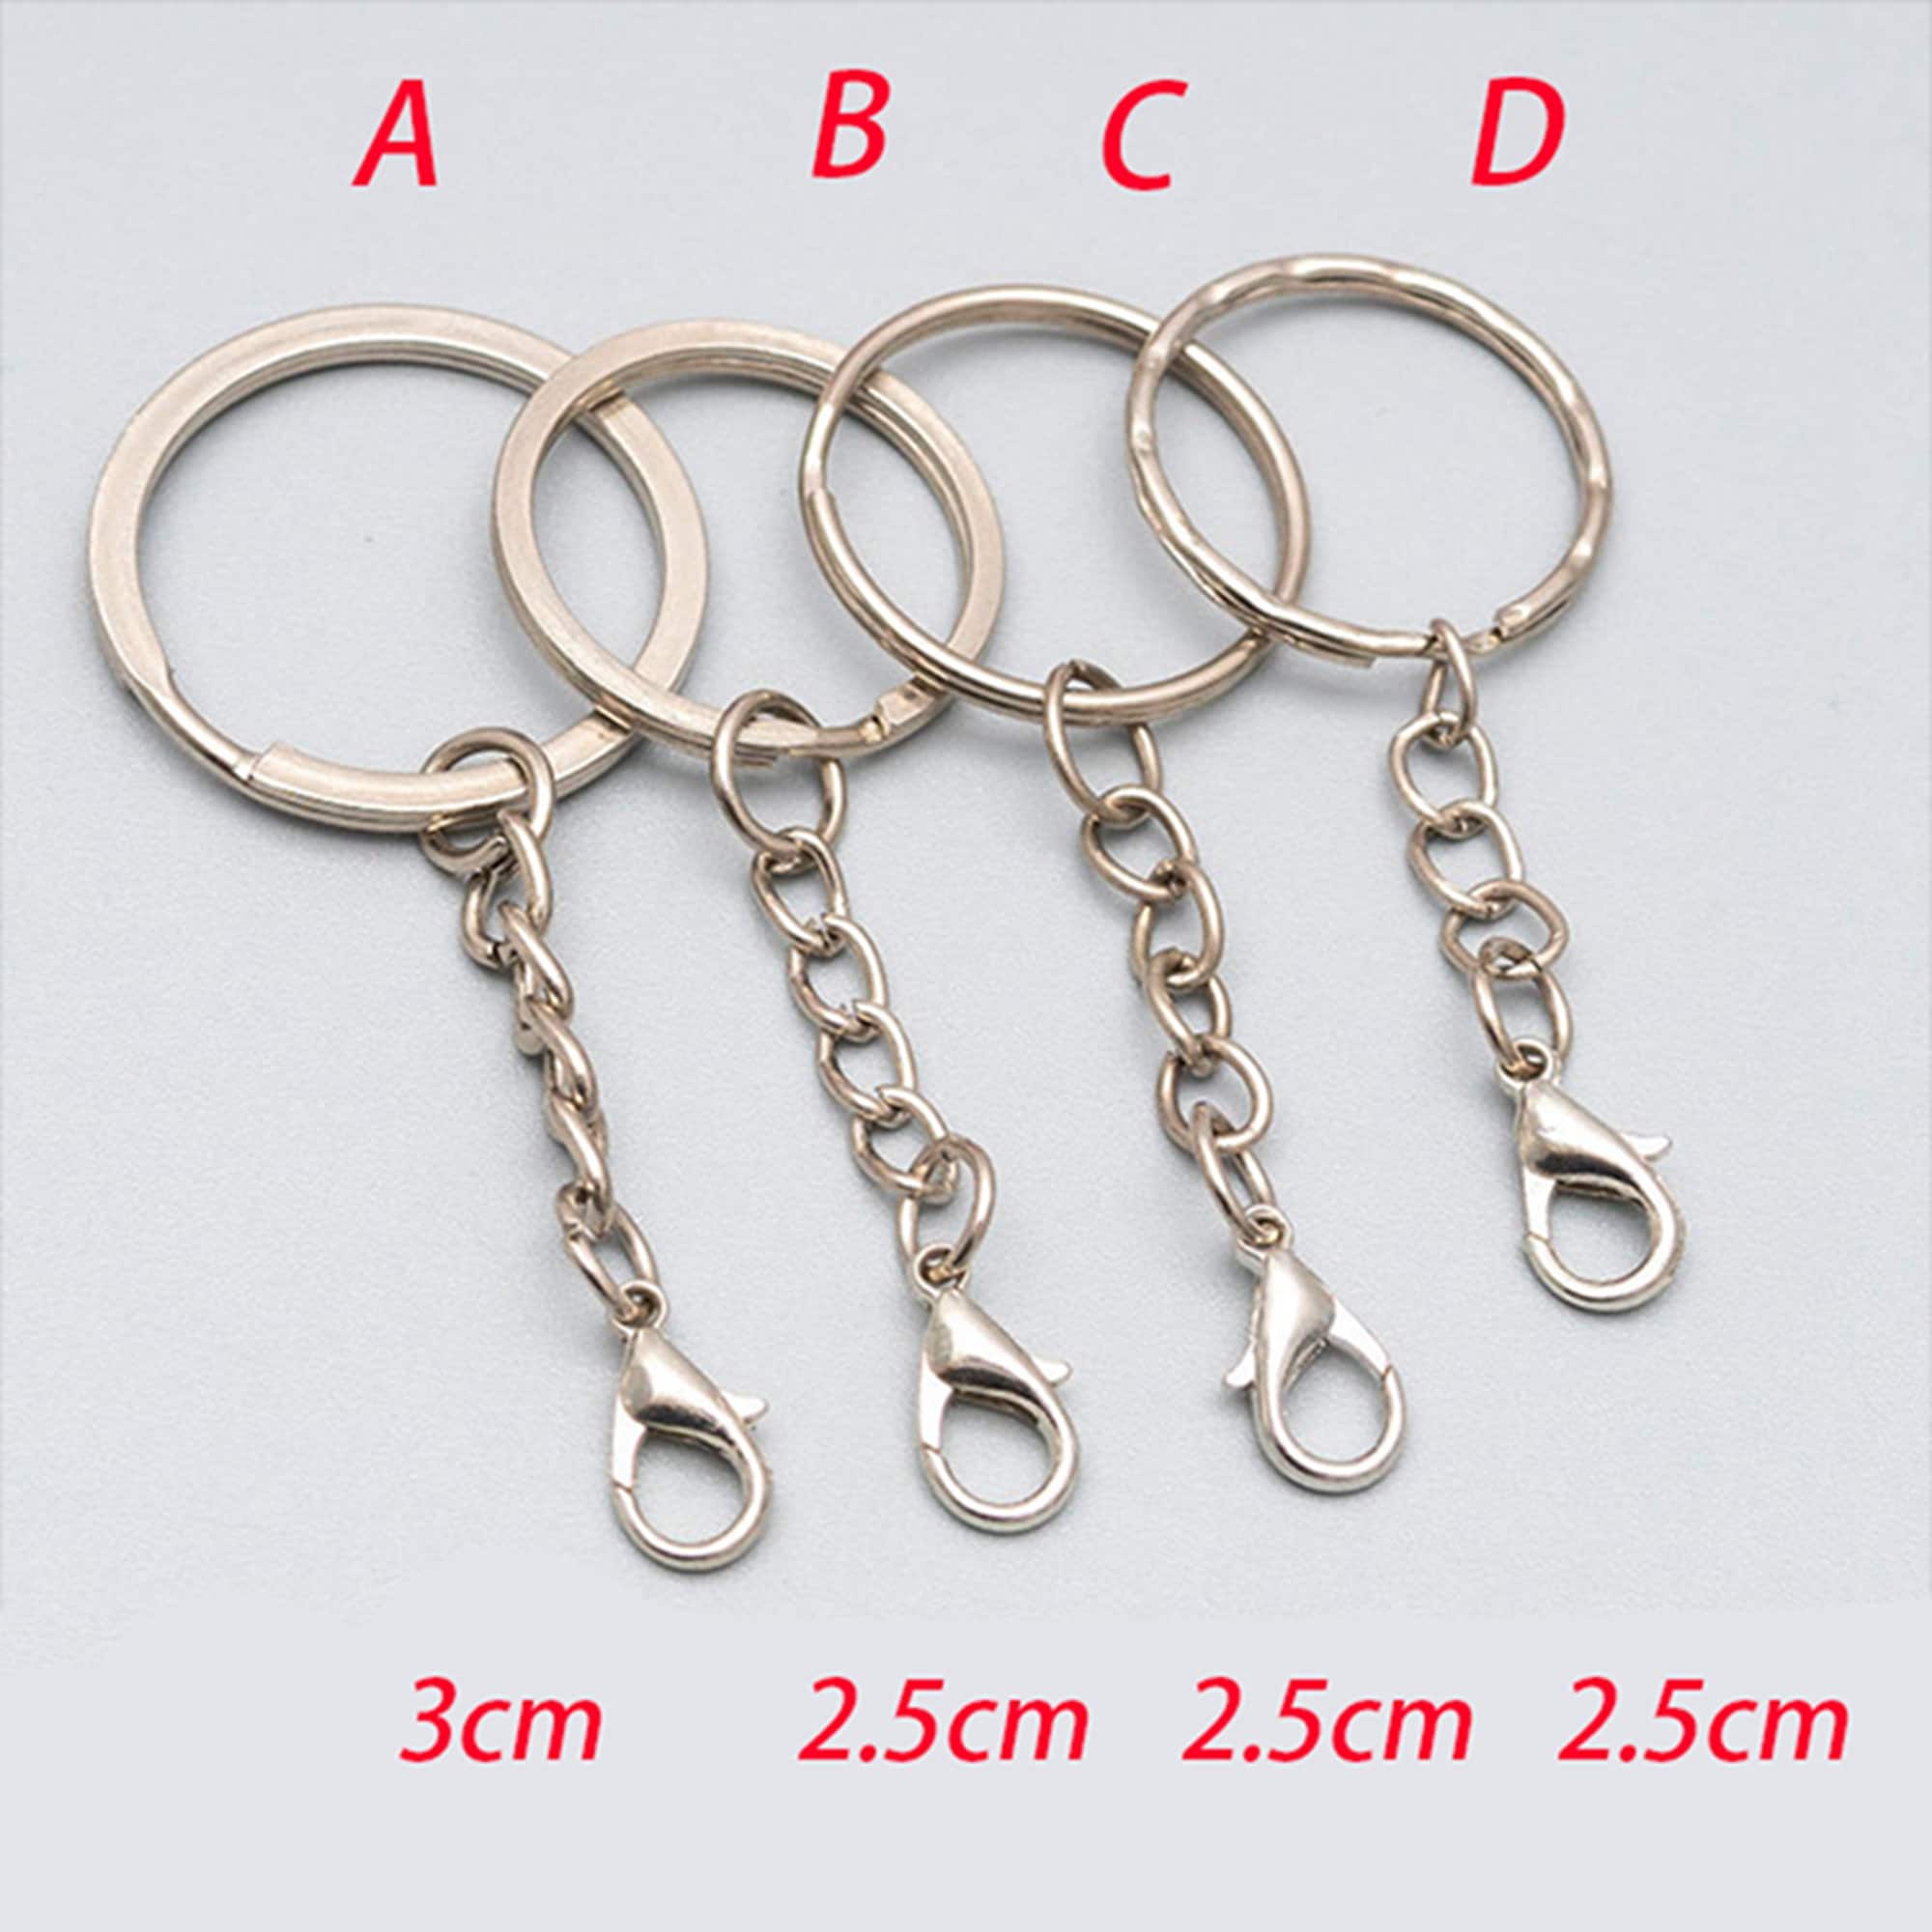 Bulk KeyChain Keyring with Chain jump rings,Split Ring Keyring Craft  Beading,Antique Copper,Key Chain Making,Keychain Supplies